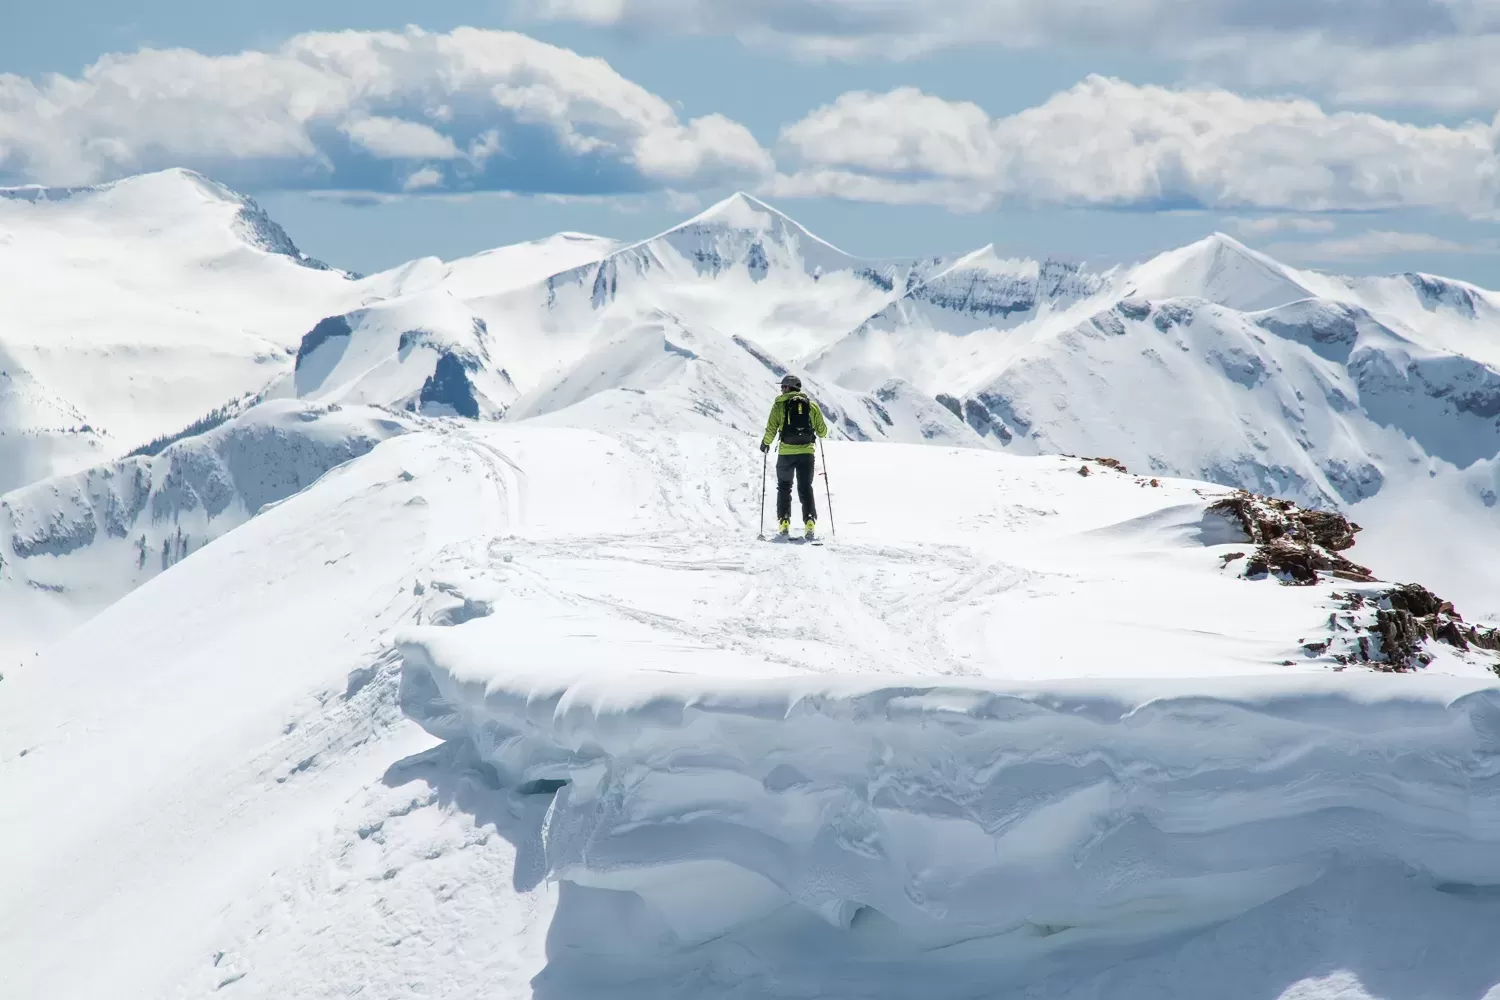 a skier faces snowy mountain peaks on top of a snowy ridge